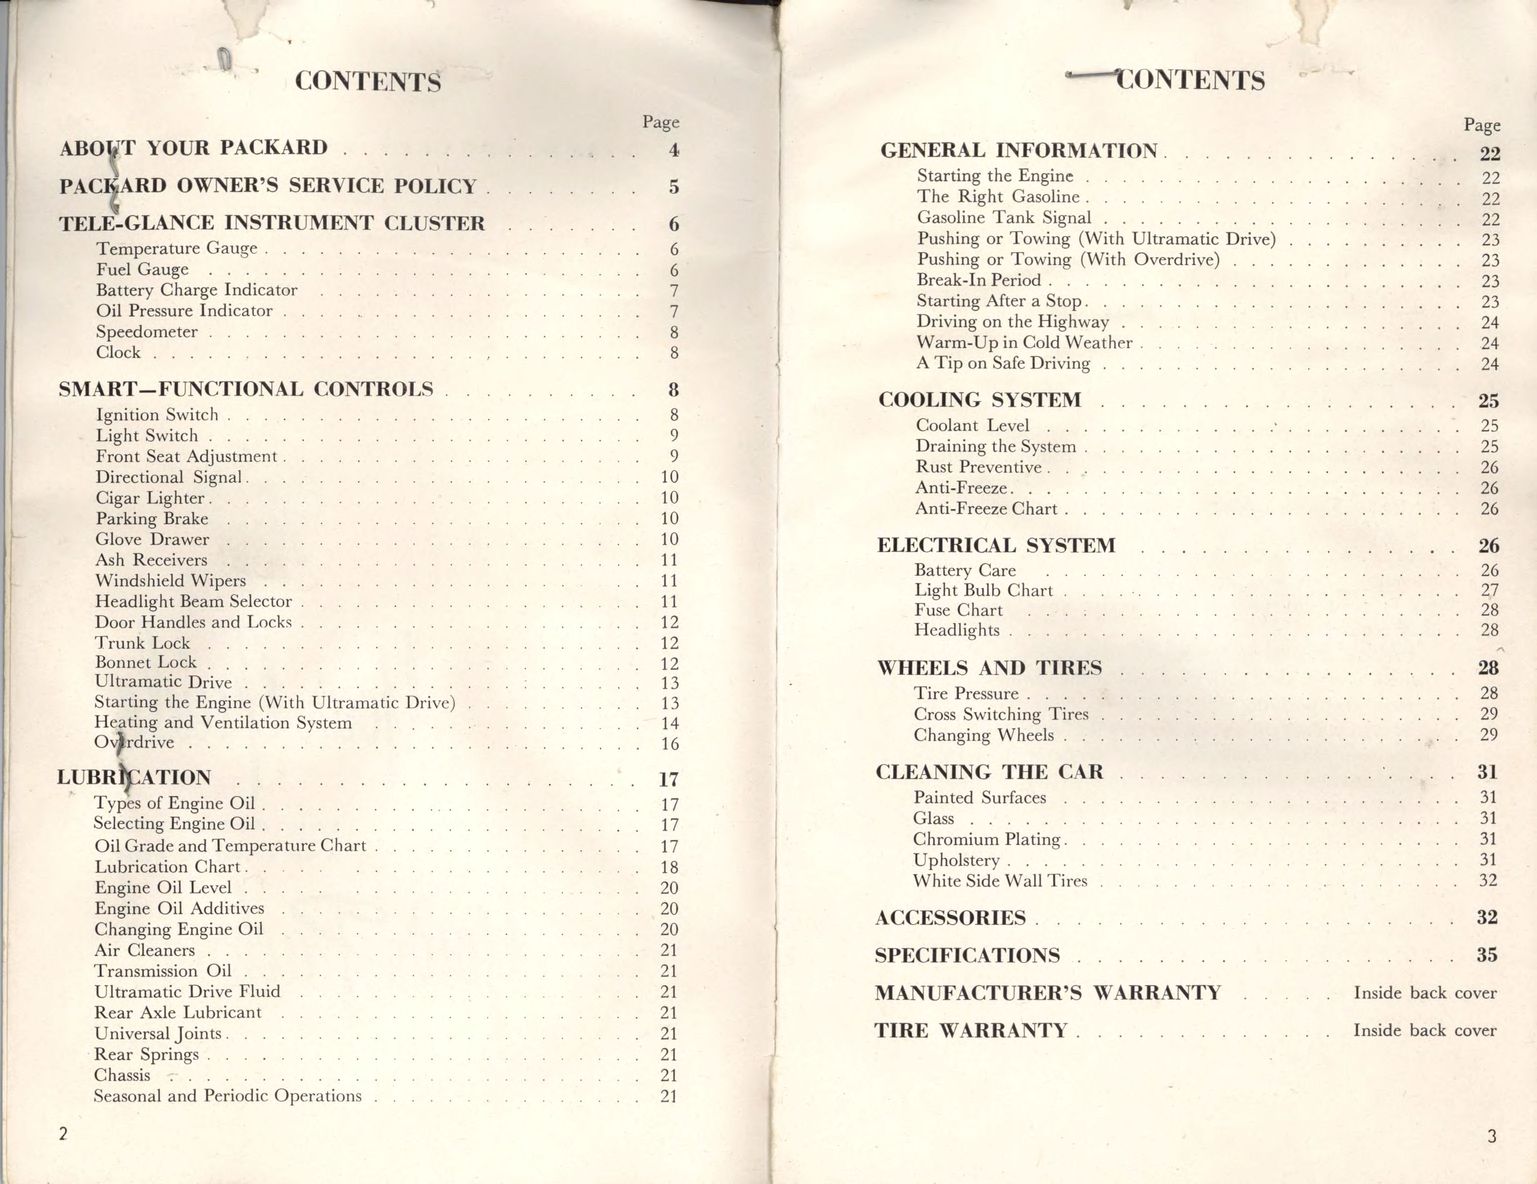 1951 Packard Owners Manual Page 17